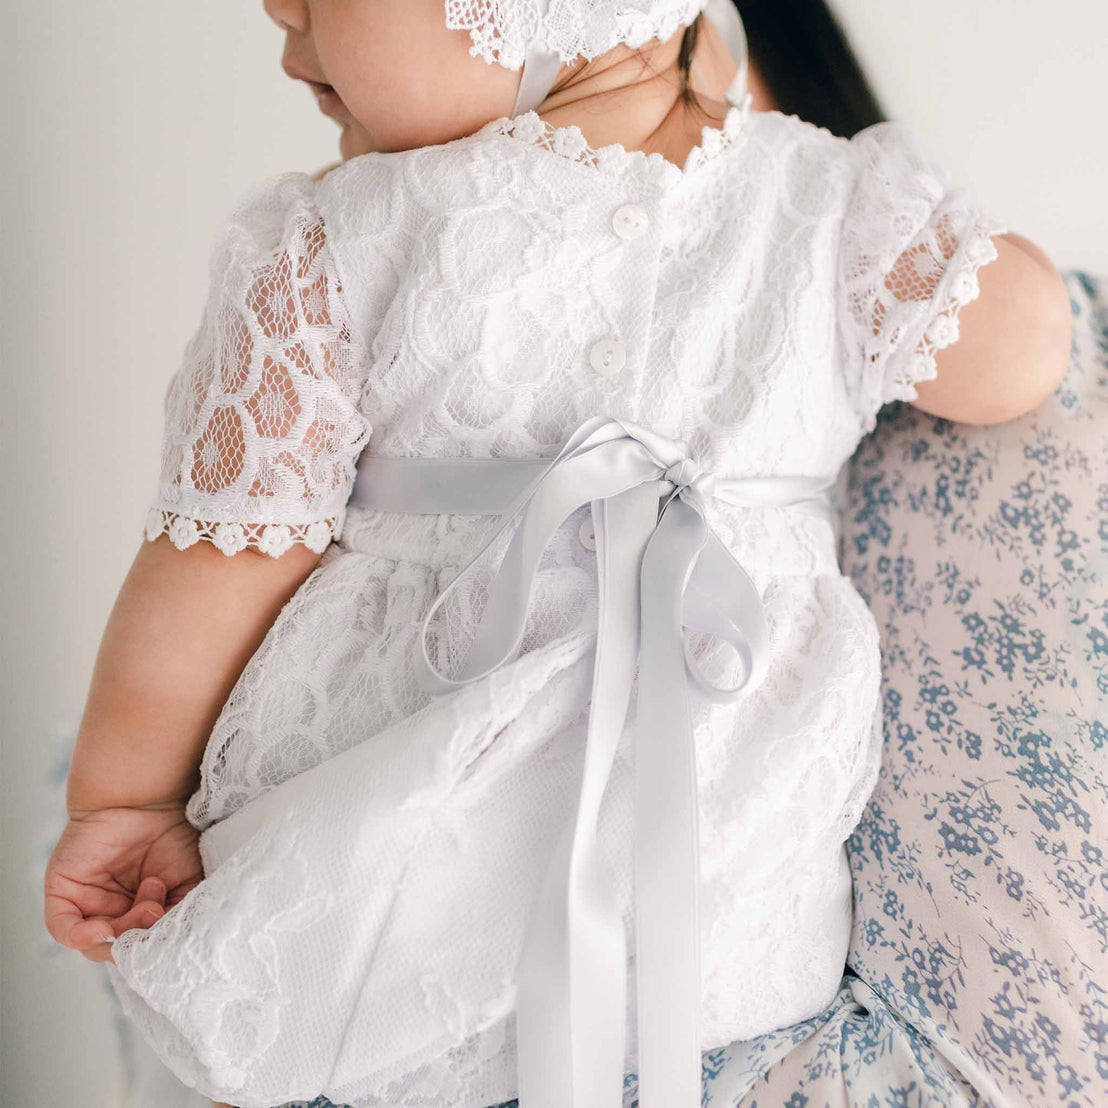 A close-up of a baby dressed in the Olivia Christening Gown & Bonnet, being held securely in a parent's arms, perfect for baptism or as a boutique baby gift.